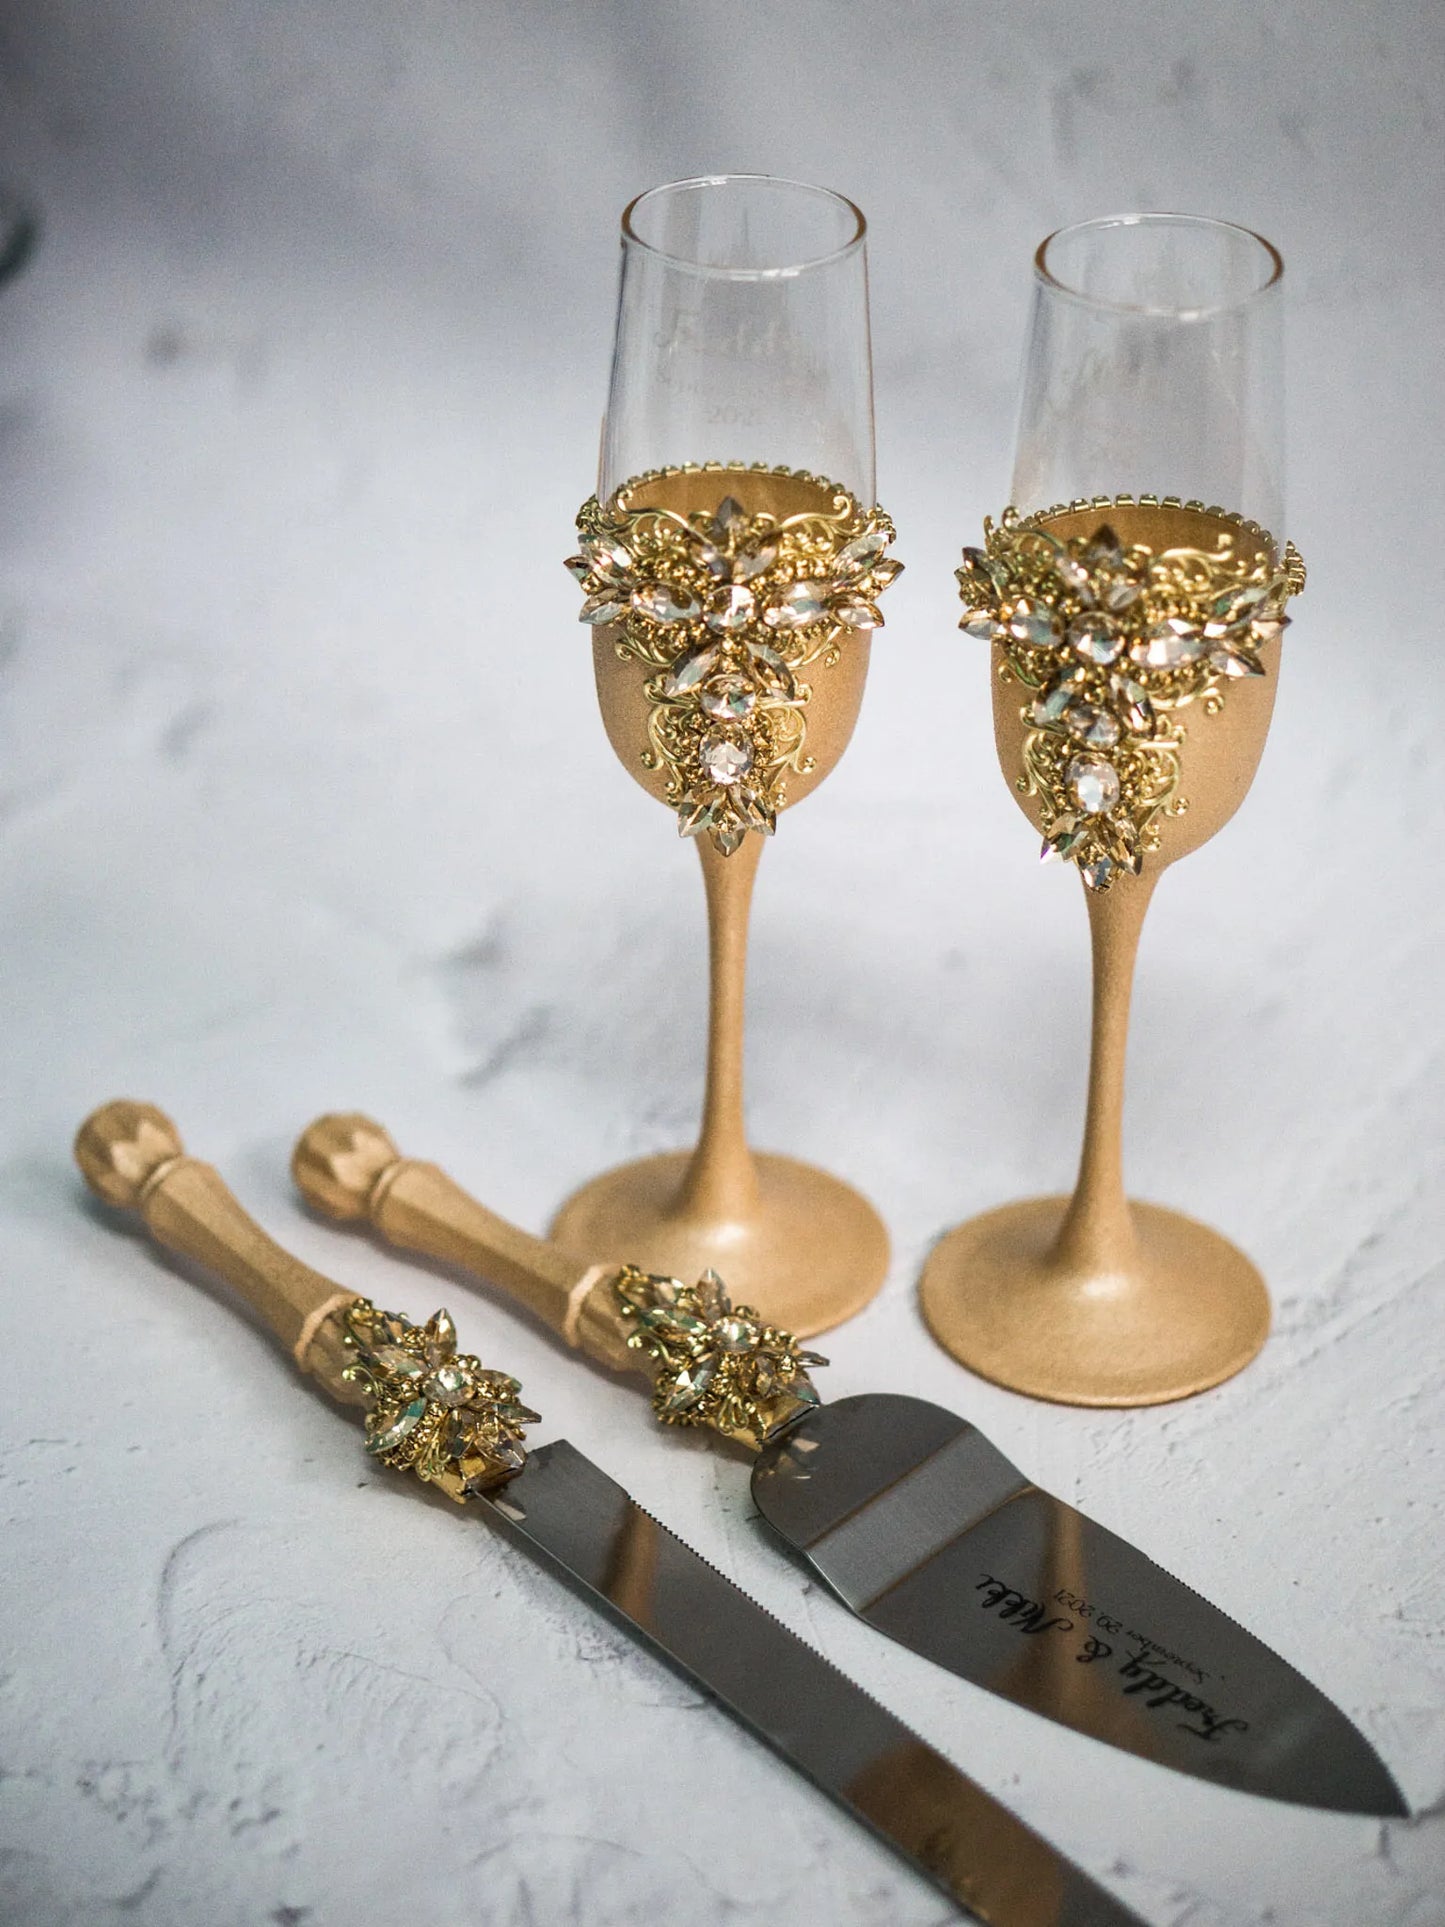 Gloria Gold Champagne Glasses and Cake Serving Set - Personalized Luxury Wedding and Anniversary Gift